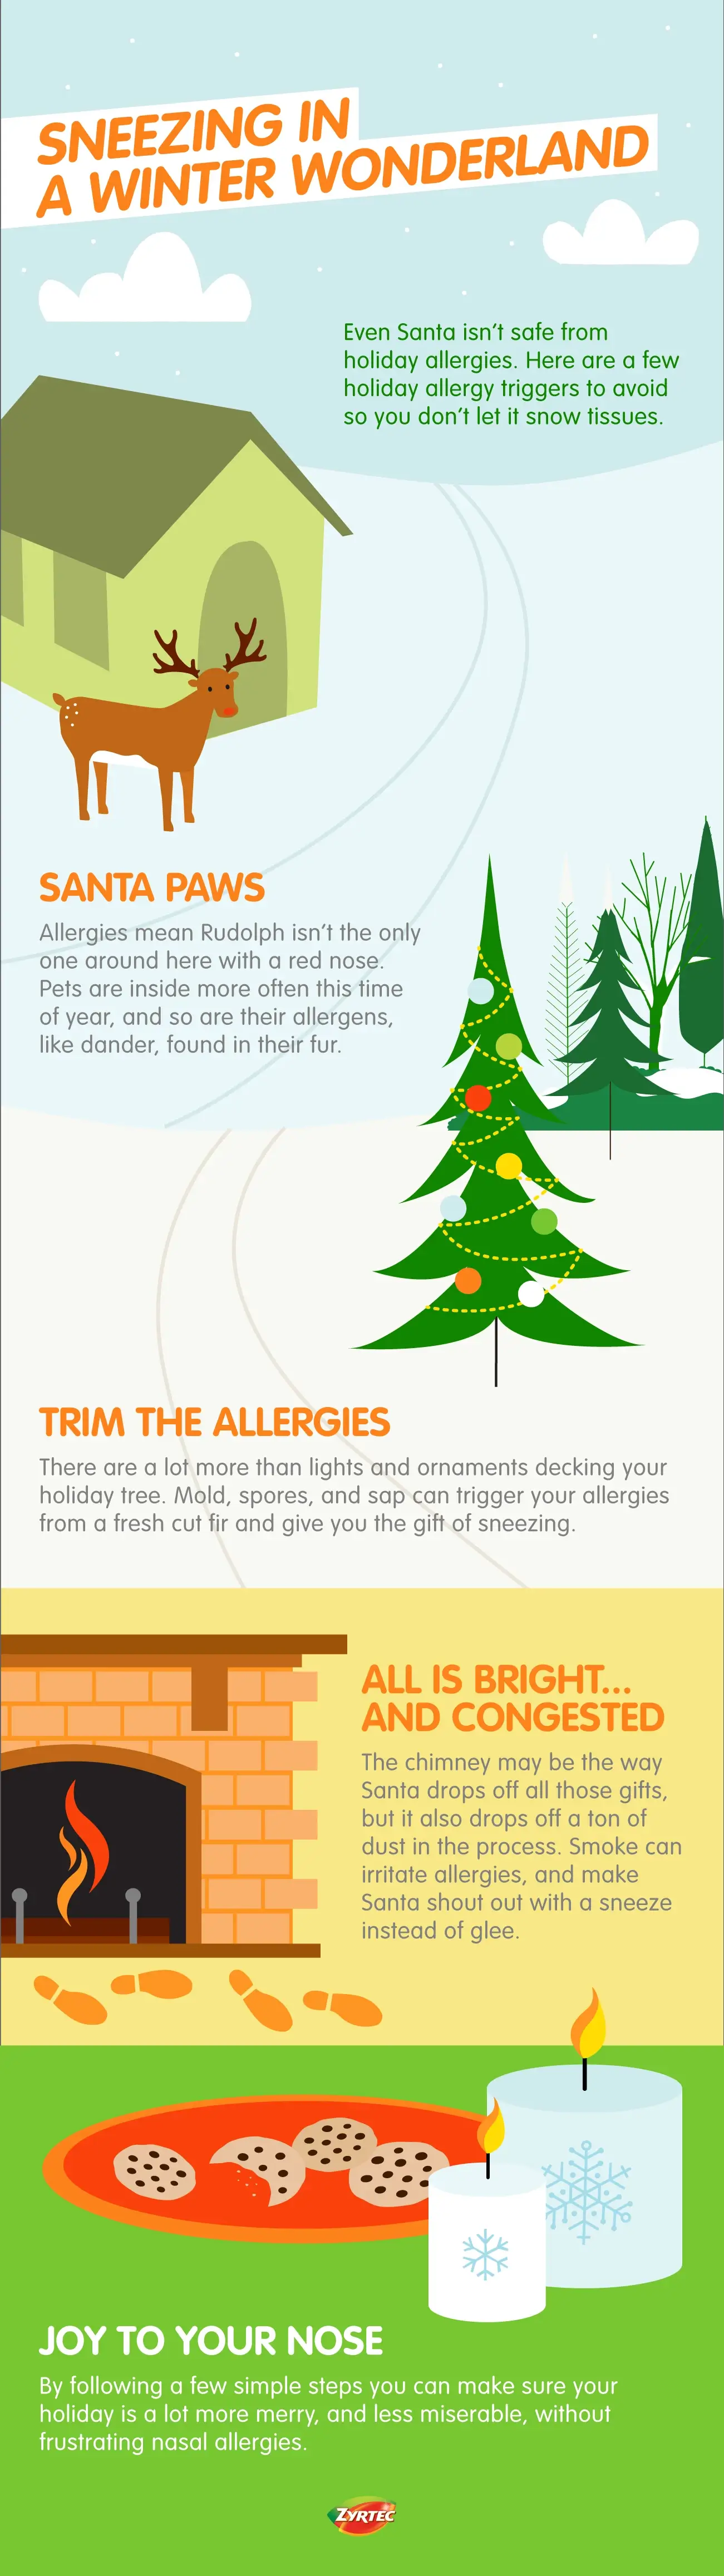 Infographic titled "Sneezing in a Winter Wonderland"